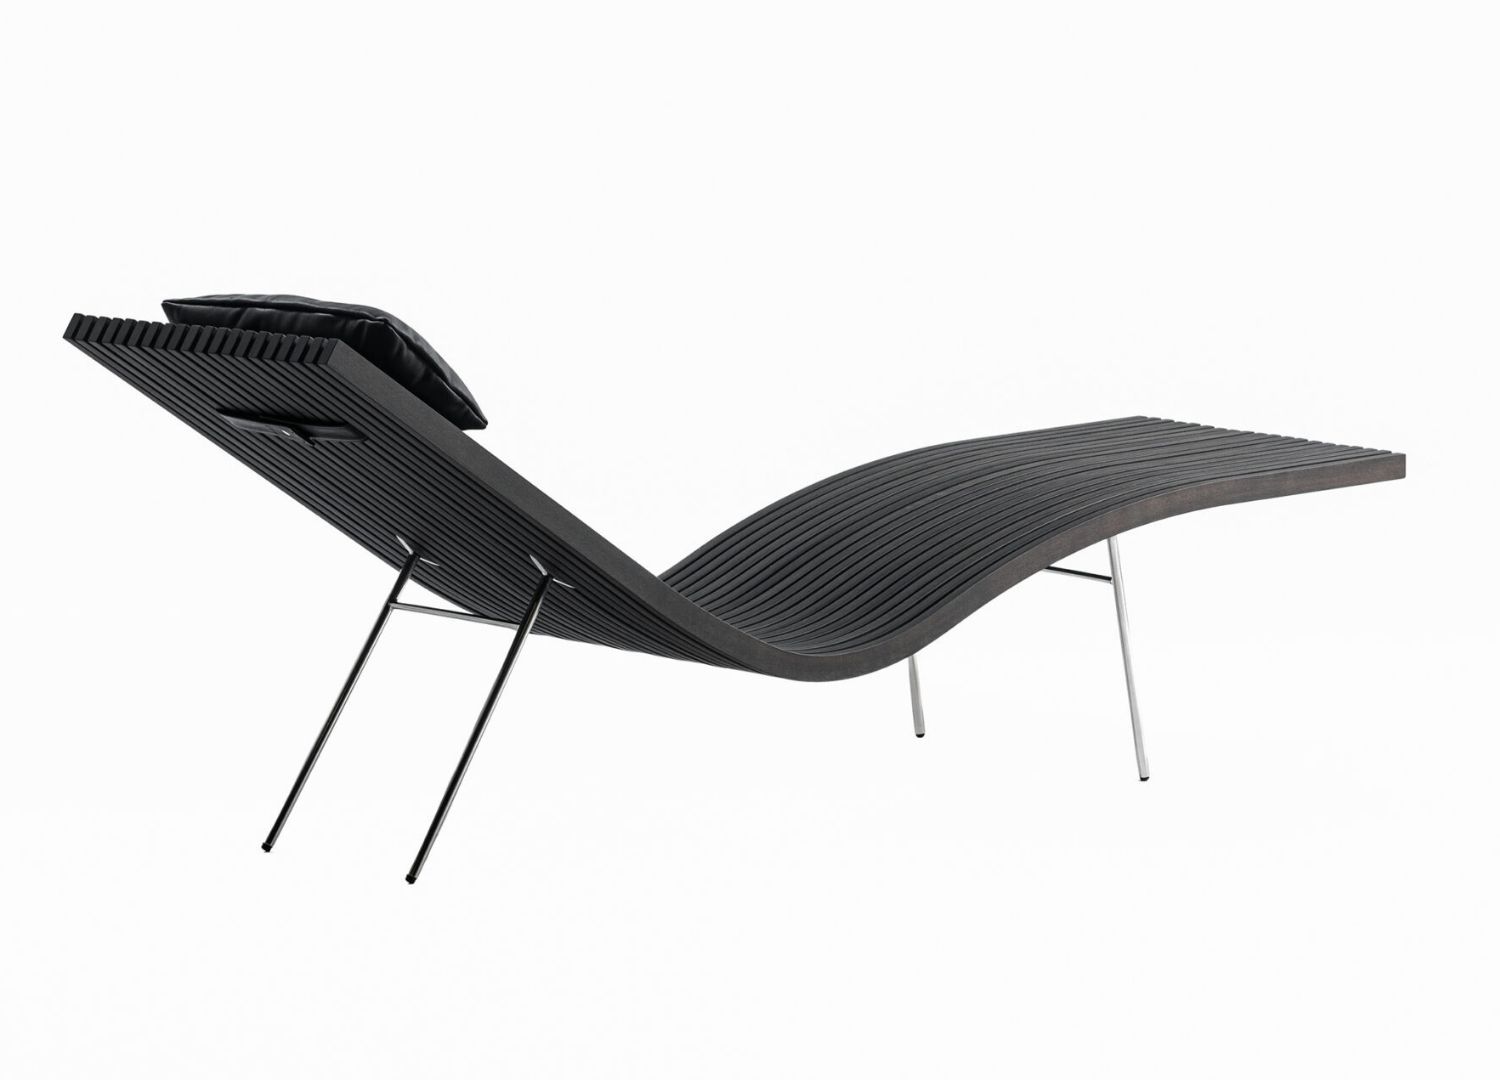 Valserliege Chaise longue by Peter Zumthor for Time & Style (2)